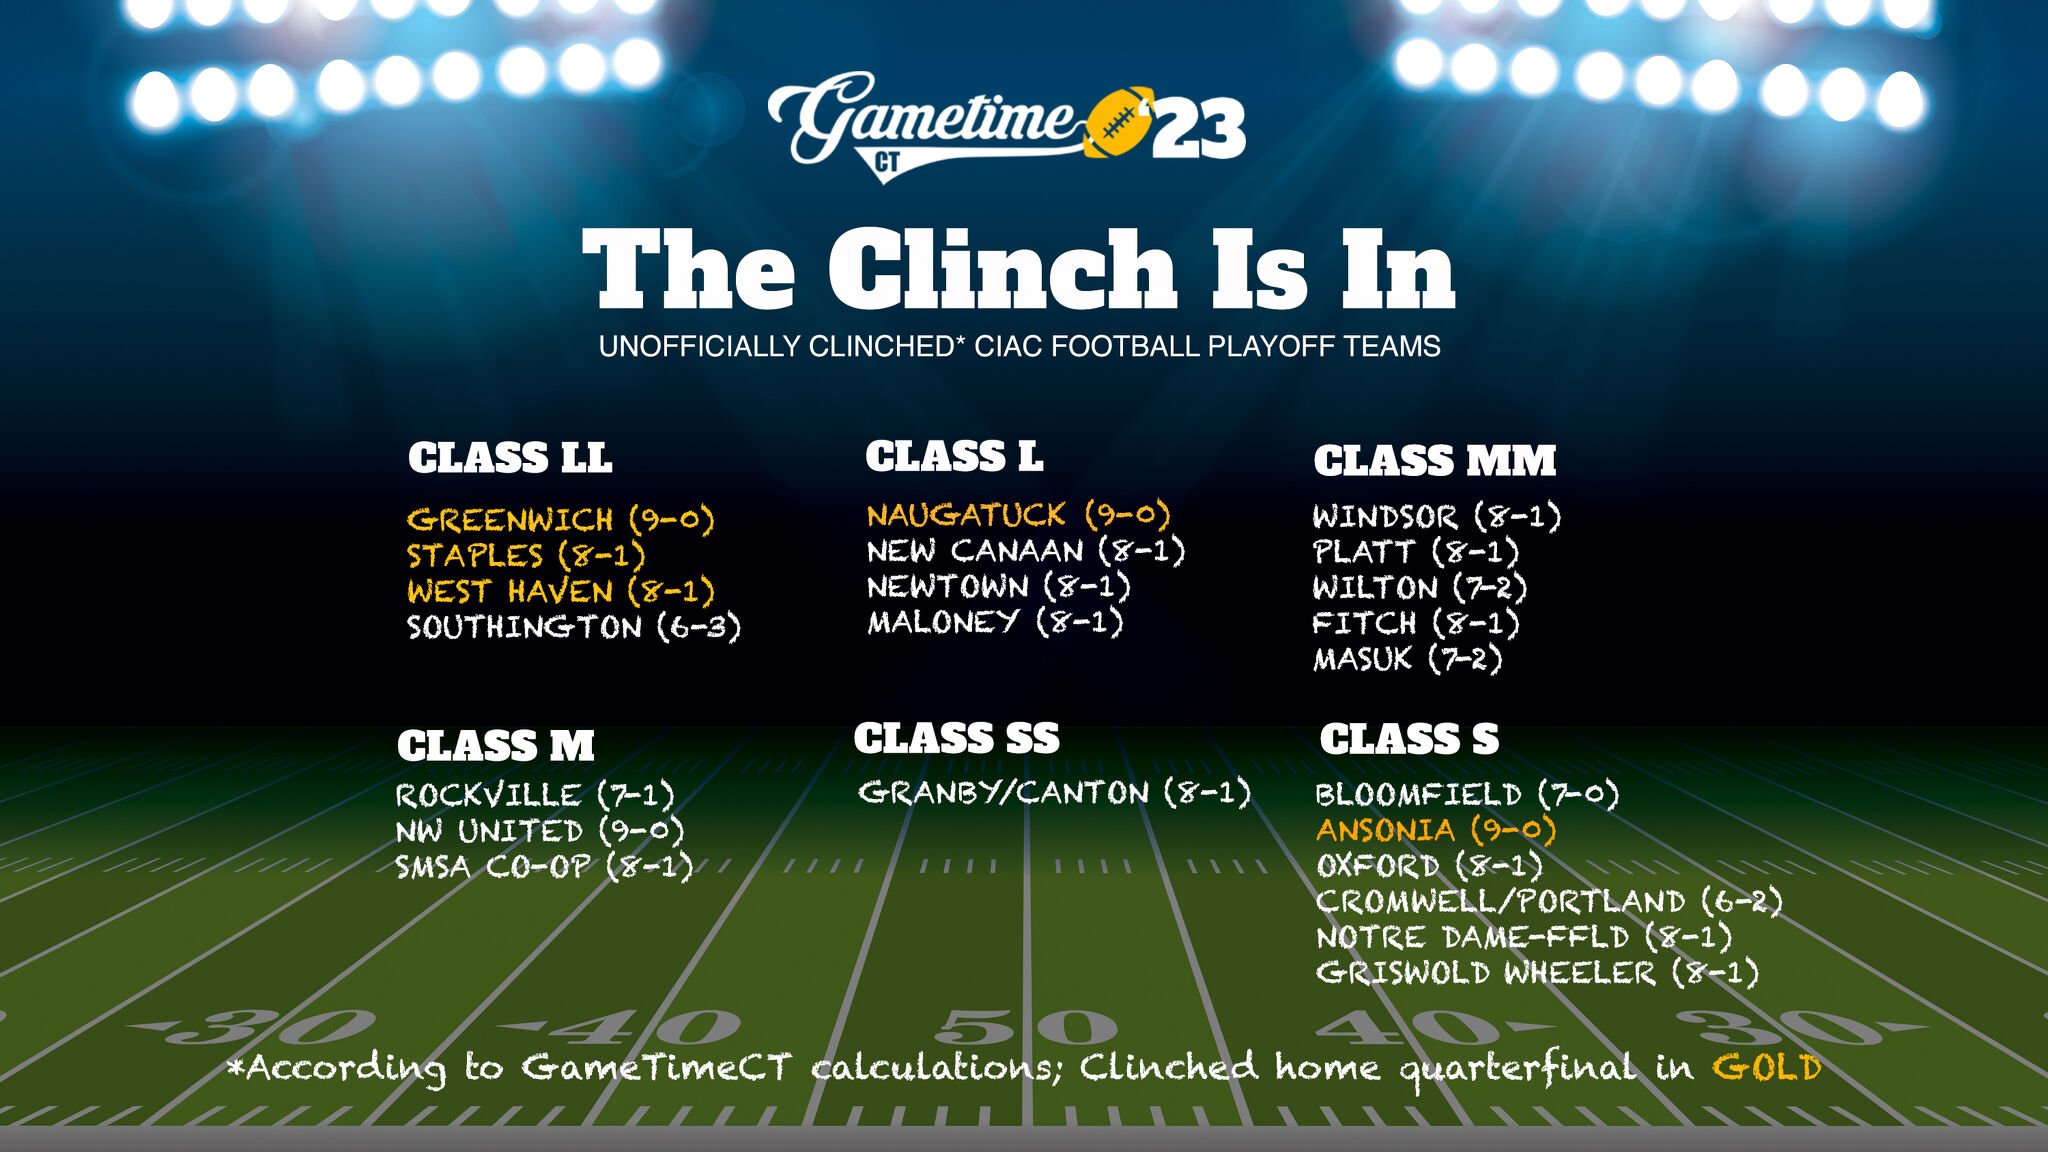 A look at the 2023 CIAC high school football playoff picture in CT